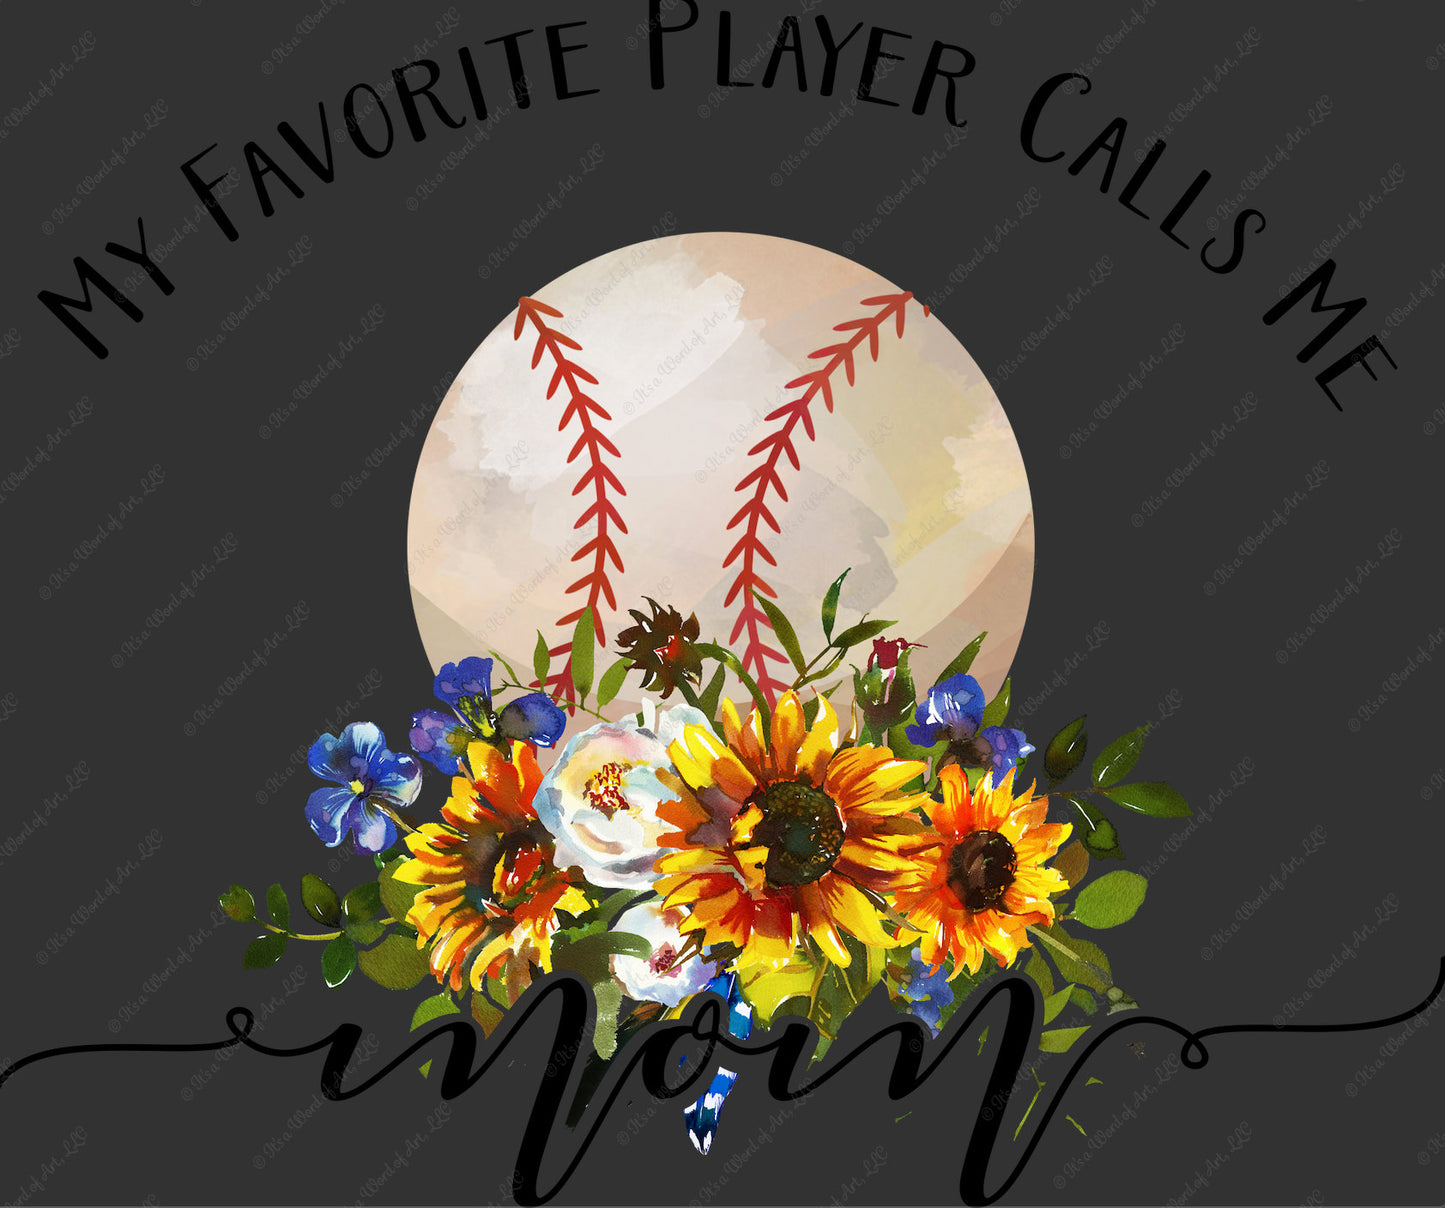 Baseball 1 - My Favorite Player Calls Me Mom - Sublimation Transfer Set/Ready To Press Sublimation Transfer/Sublimation Transfer - Floral